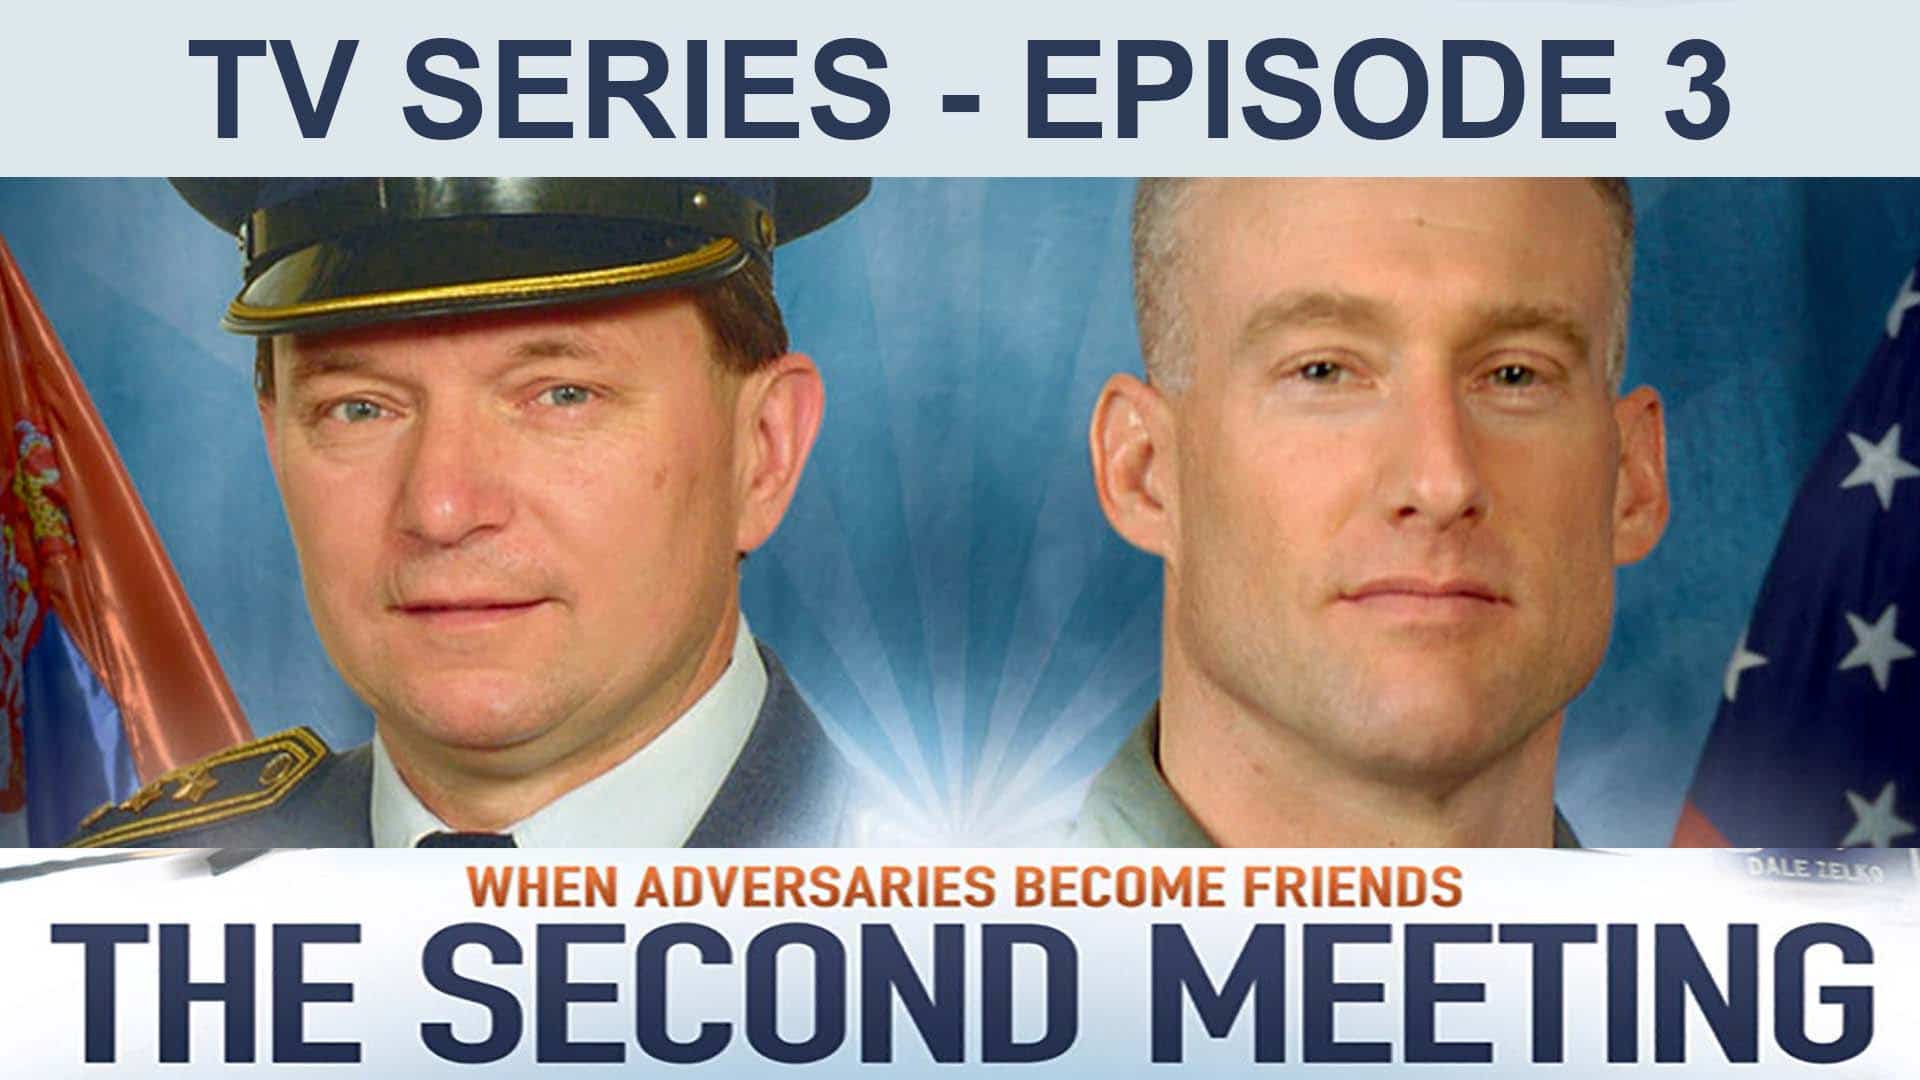 The Second Meeting TV Series Episode 3